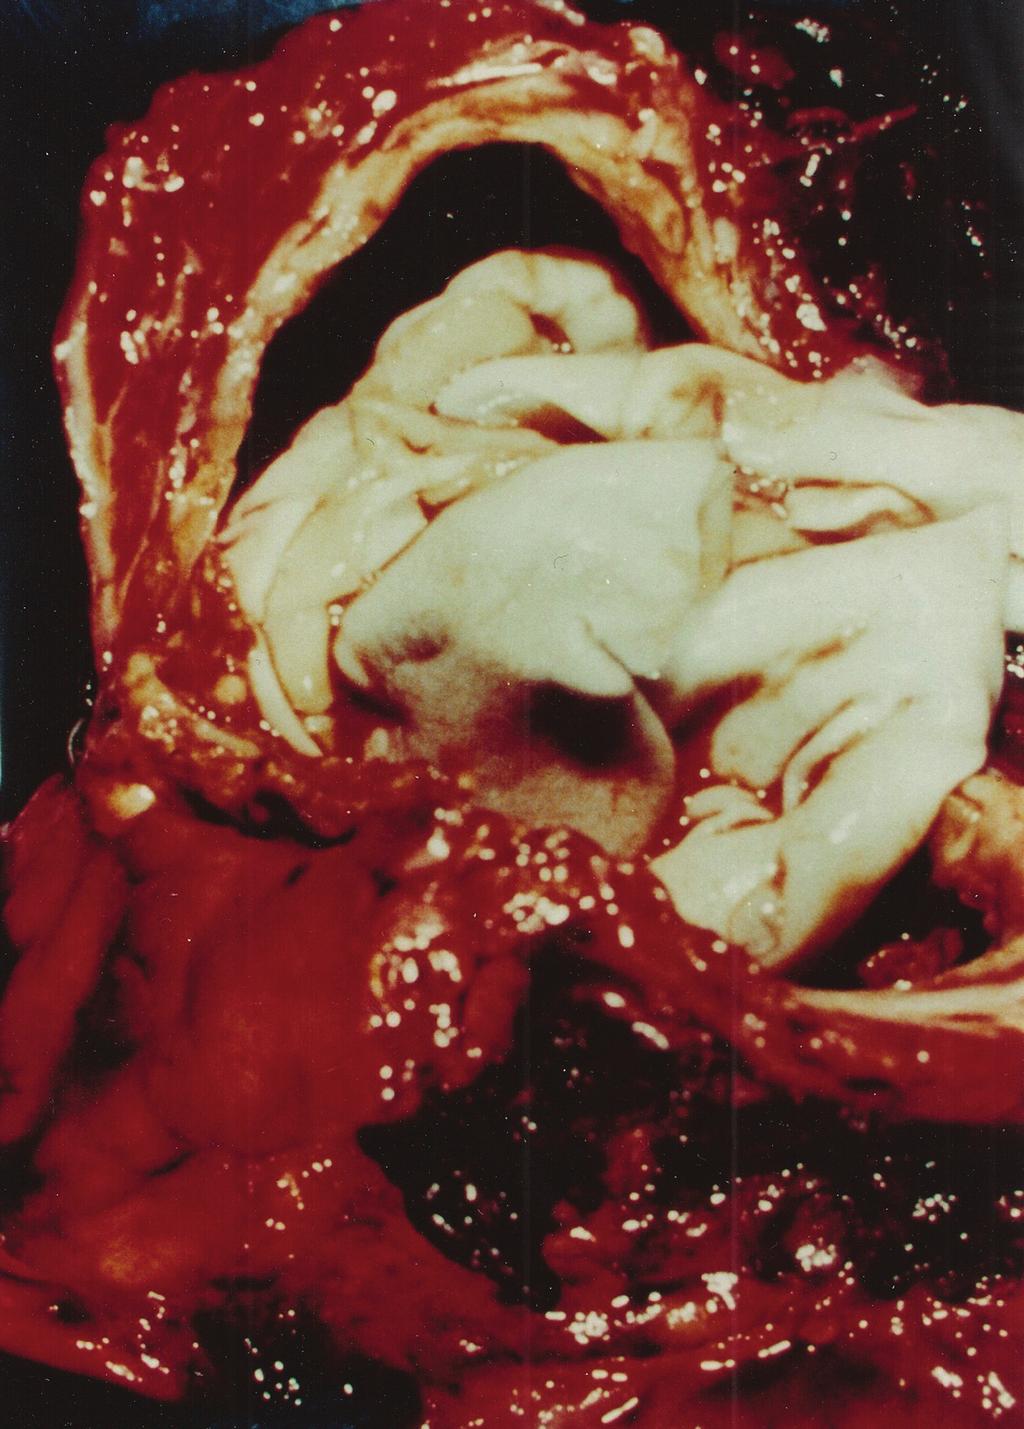 The cyst consisted of an outer shell, the ectocyst, with a glistening white inner surface. Contained within was a pearly membranous structure, the endocyst, lying in a pool of turbid brownish fluid.